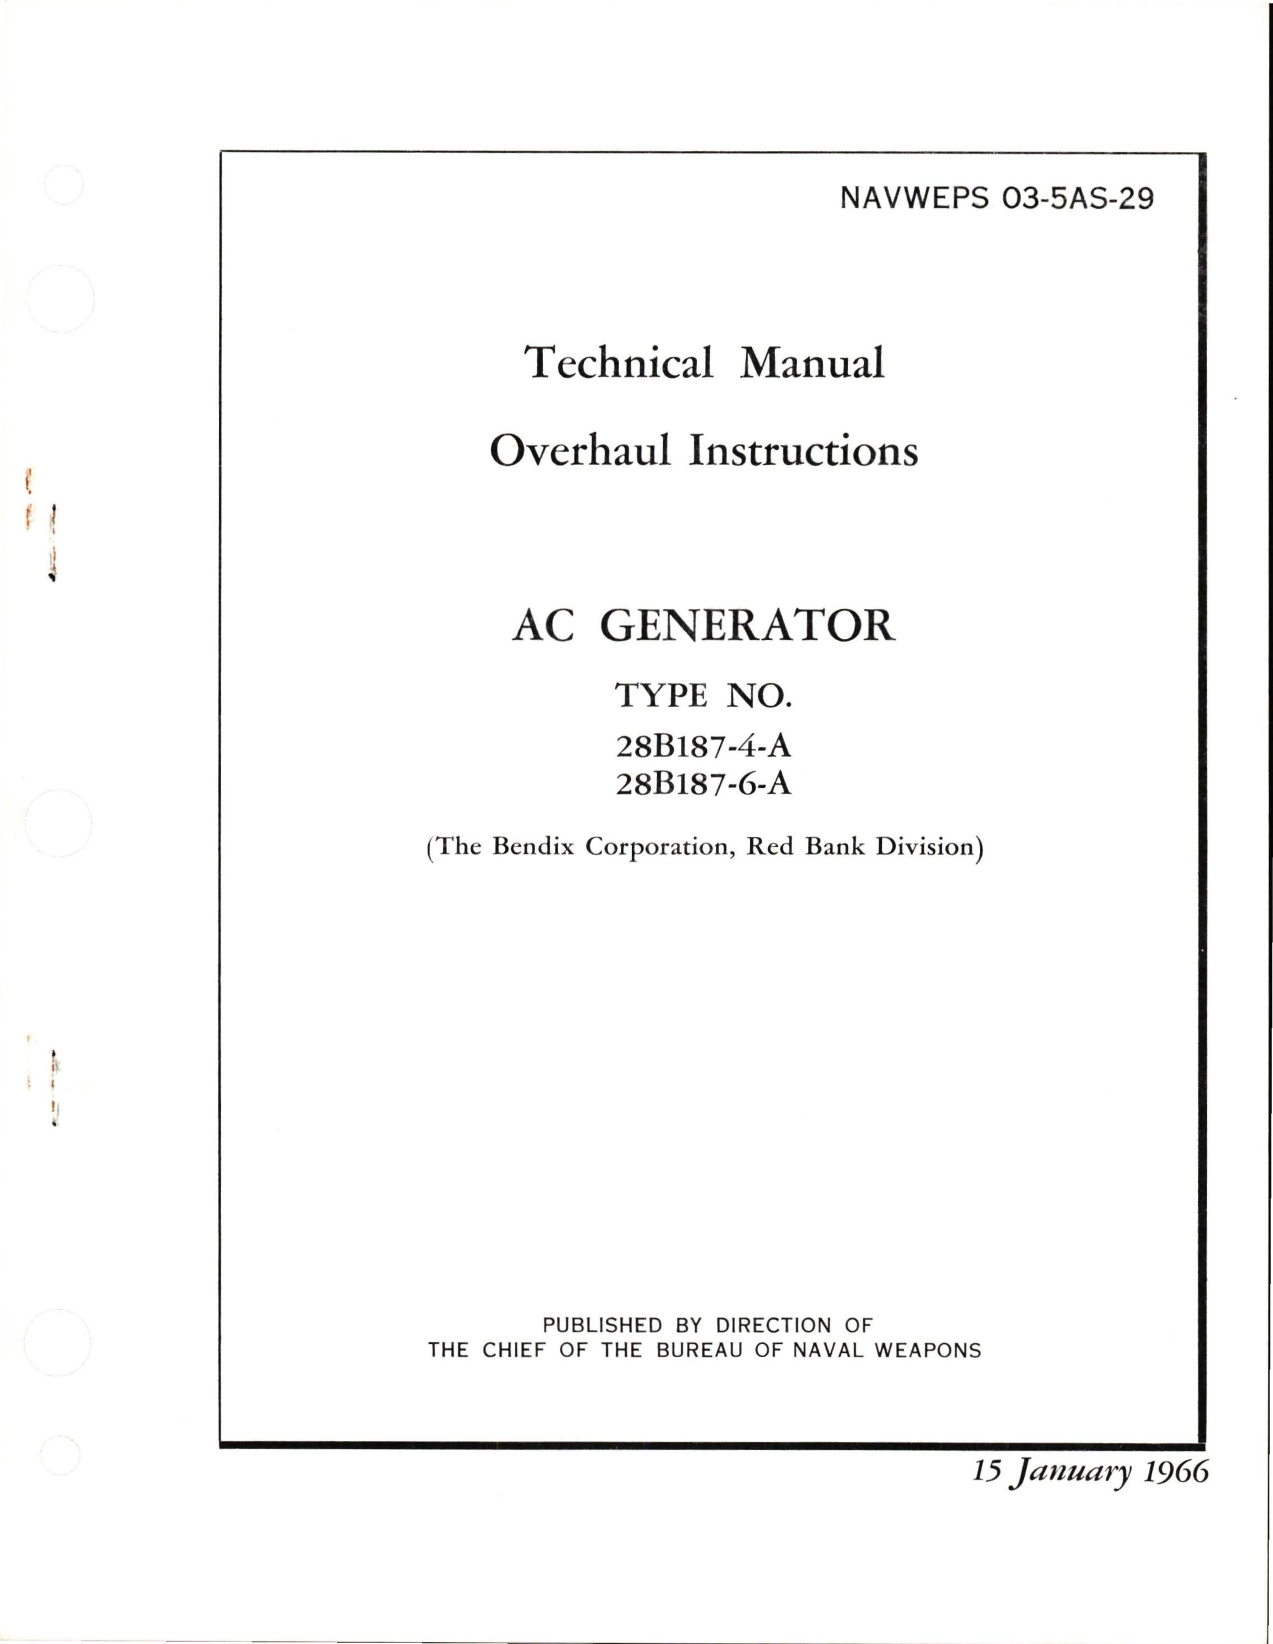 Sample page 1 from AirCorps Library document: Overhaul Instructions for AC Generator - Type 28B187-4-A, 28B187-6-A